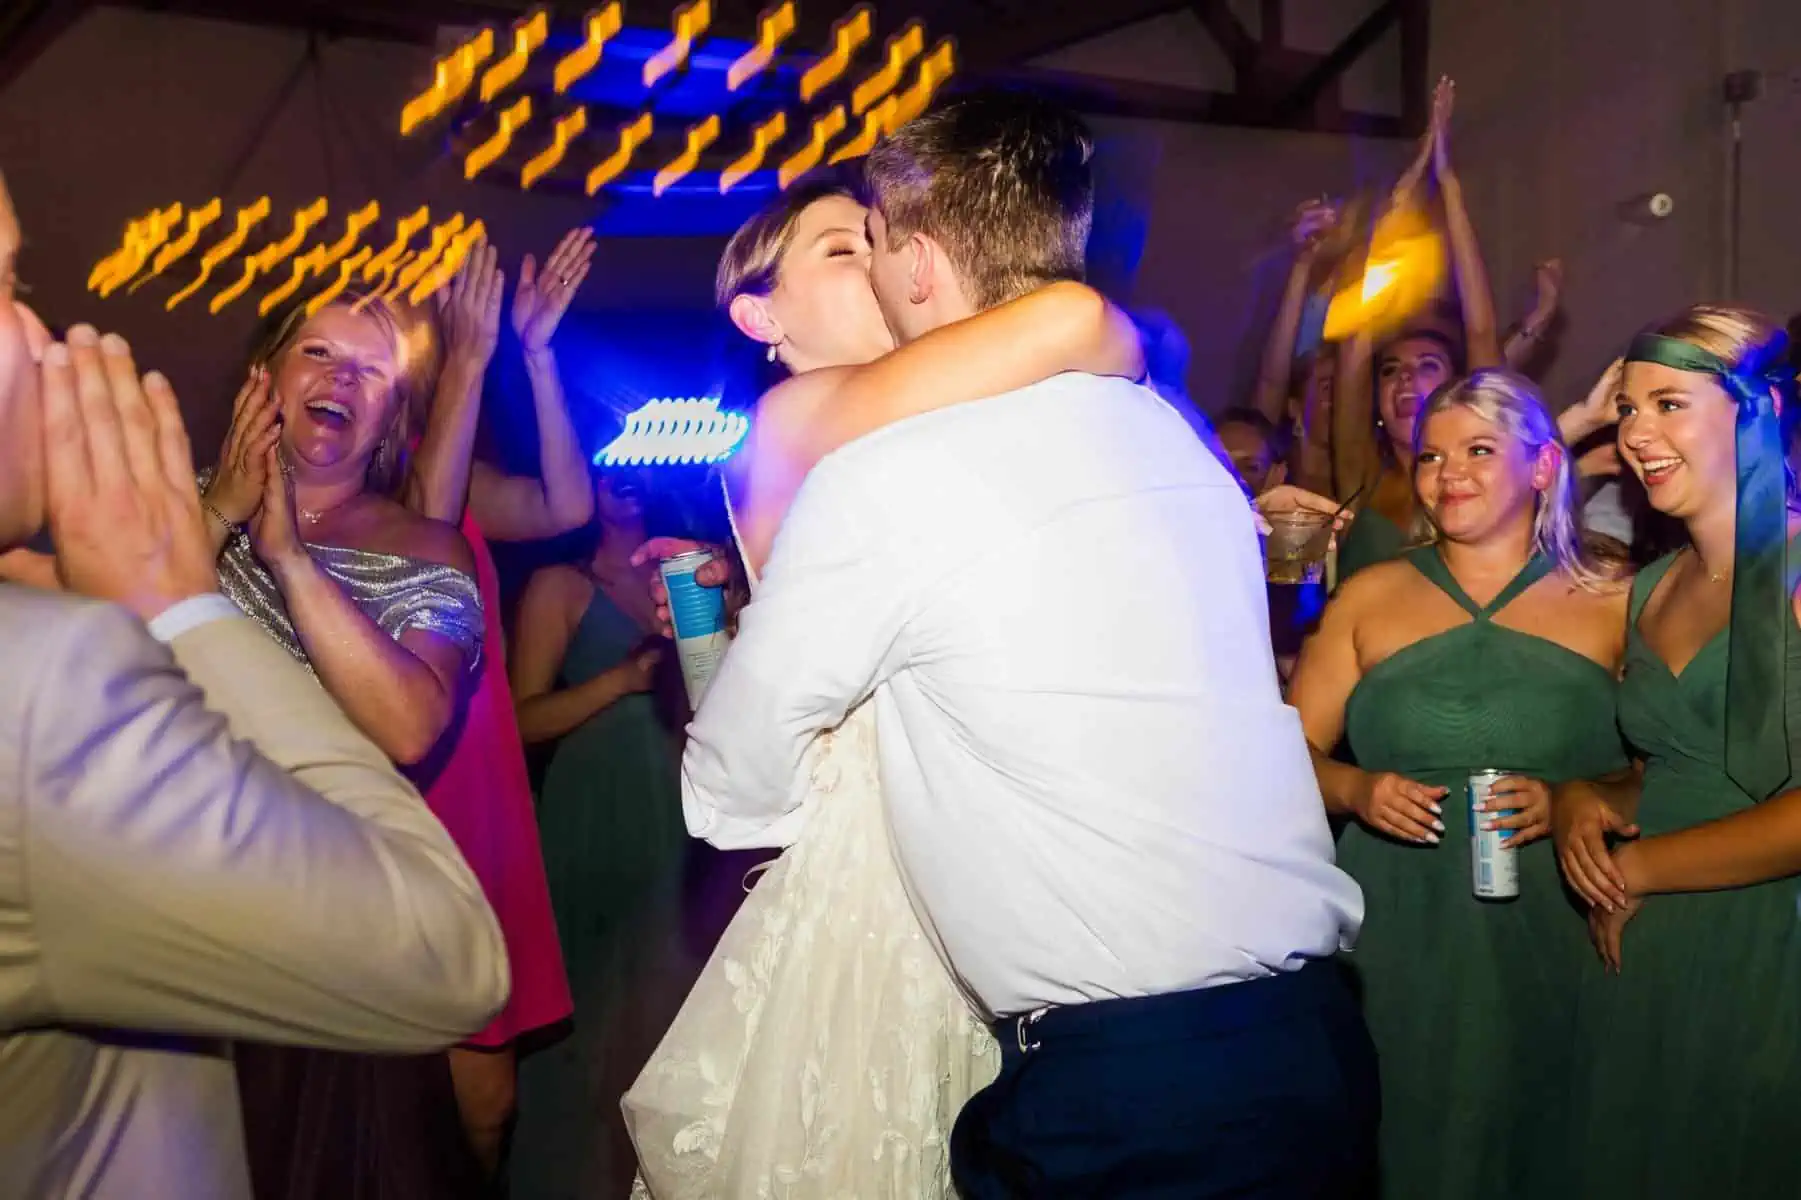 A bride and groom hugging at their wedding reception.